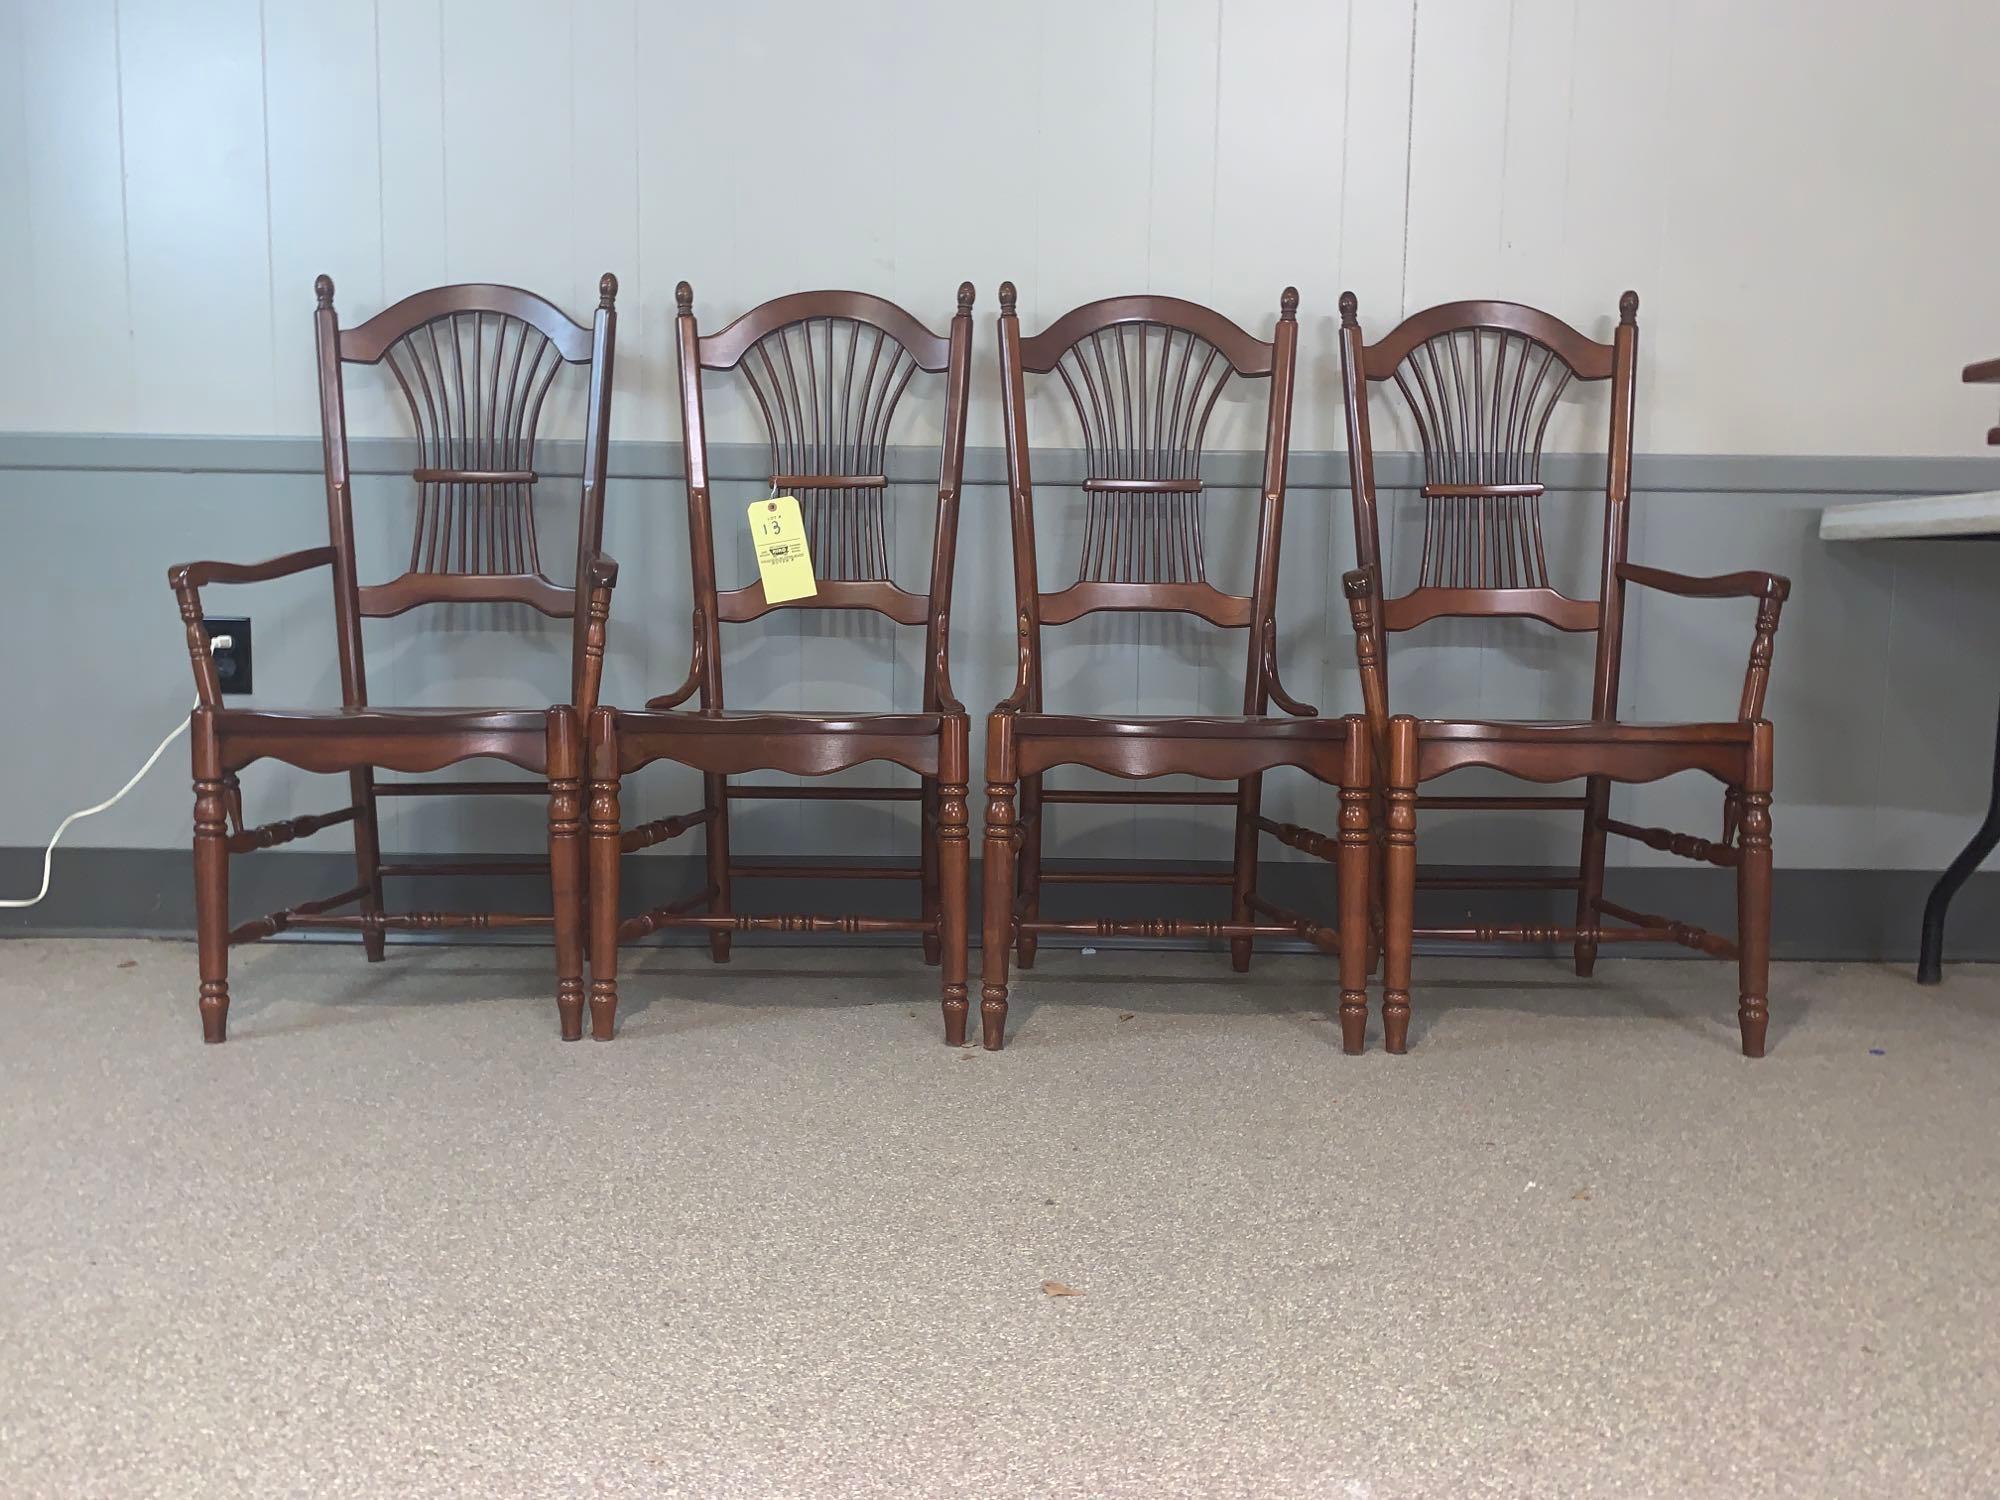 Four Dinner Table Chairs